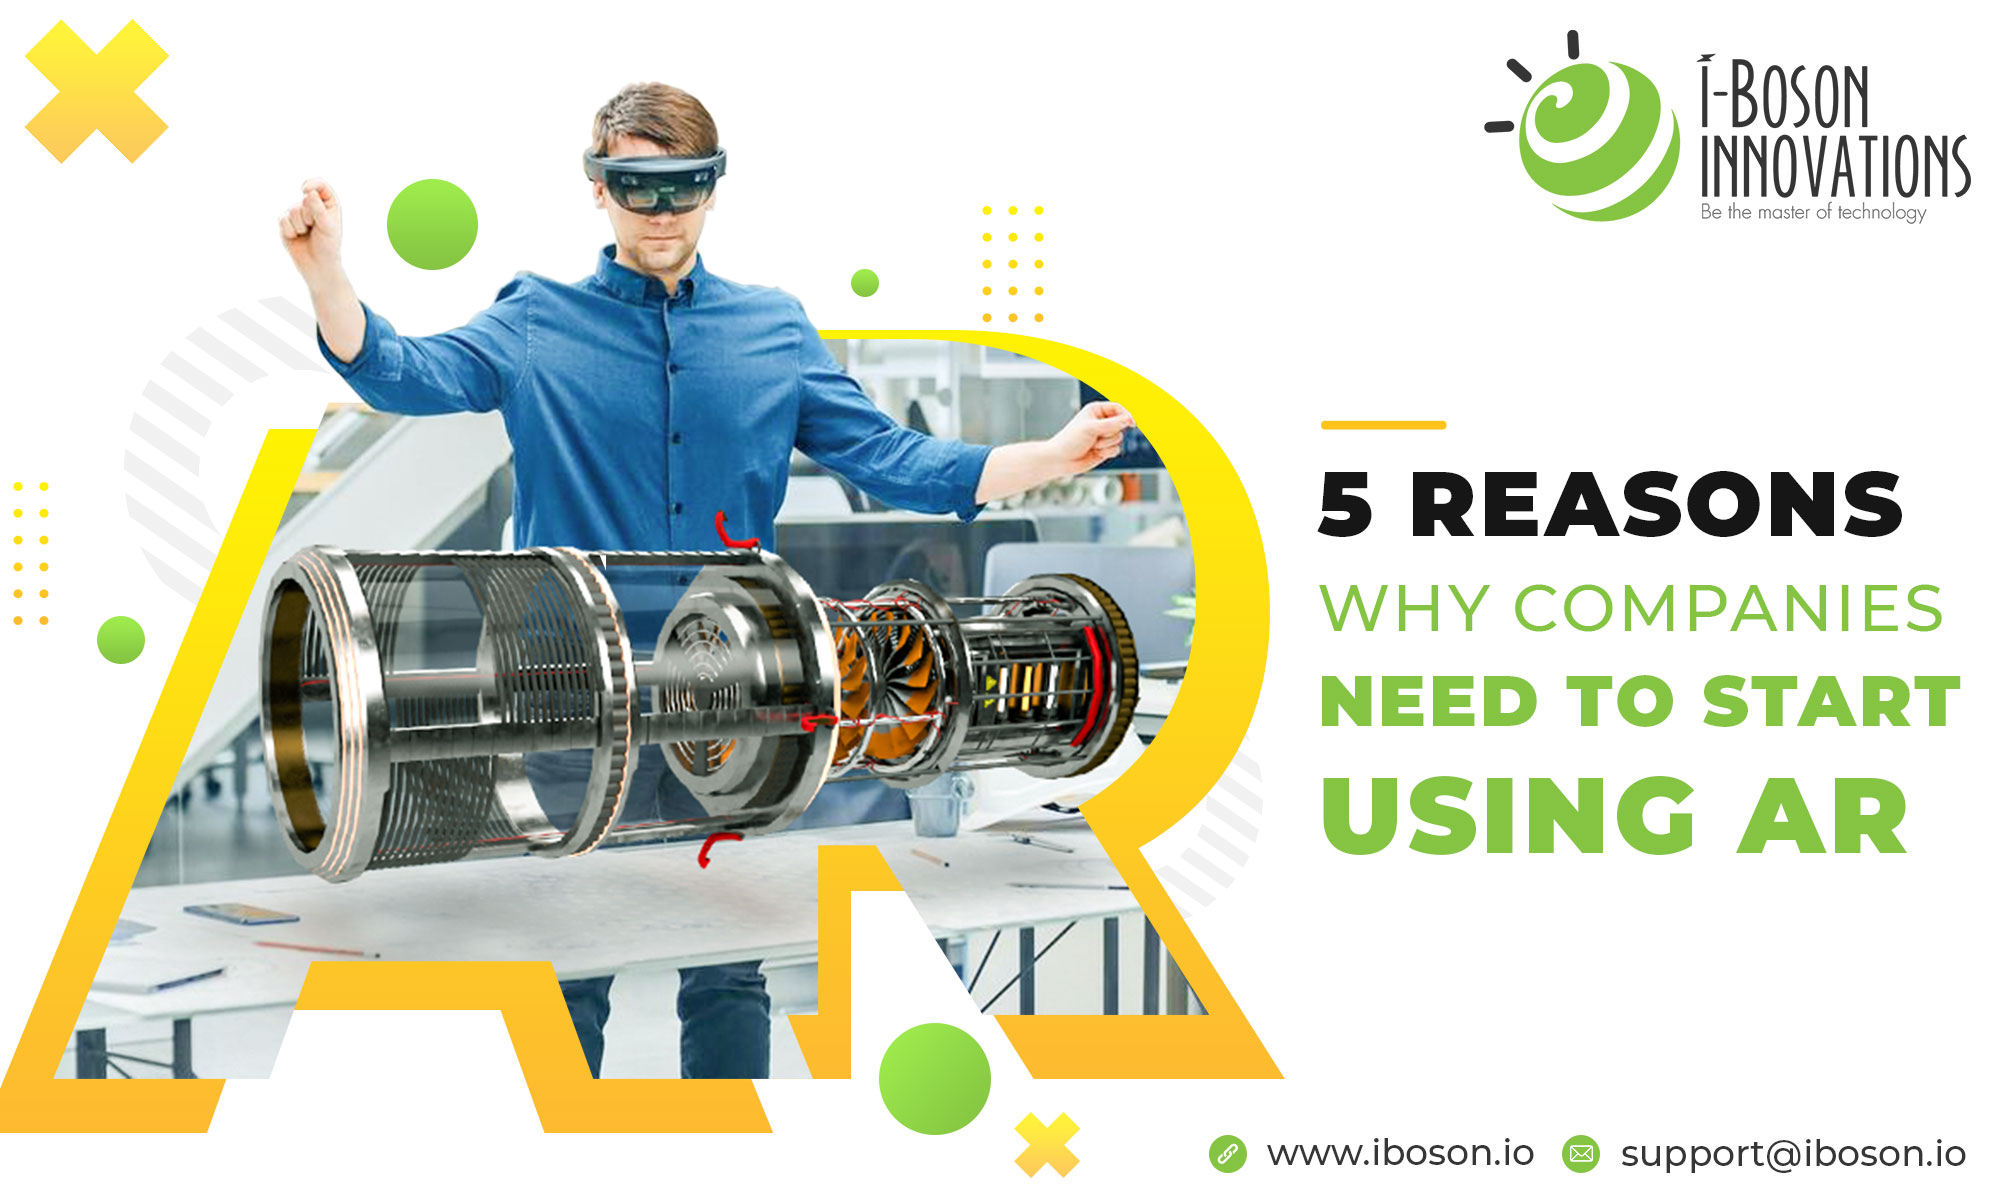 5 reasons why companies should start using augmented reality